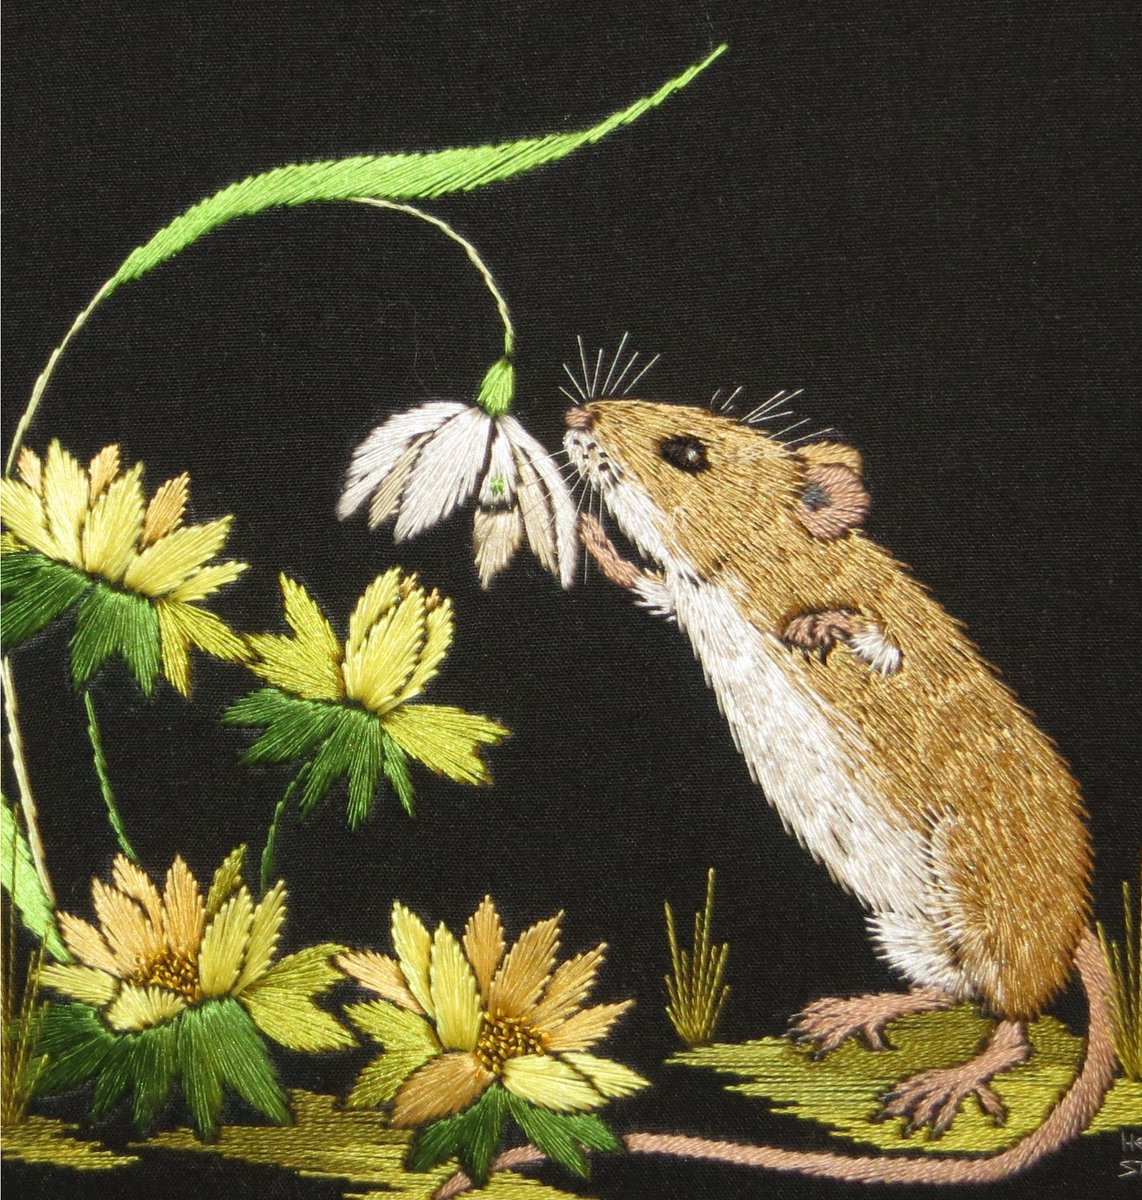 Well, the first of the last month of winter (oh dear, summer Down Under, sorry!) is finally with us!  Down in the Abbey Gardens the snowdrops and aconites are welcoming a beautiful sunny morning.  And Mr. Mousie is out and about...
#embroidery #englishcountryside #britishwildlife